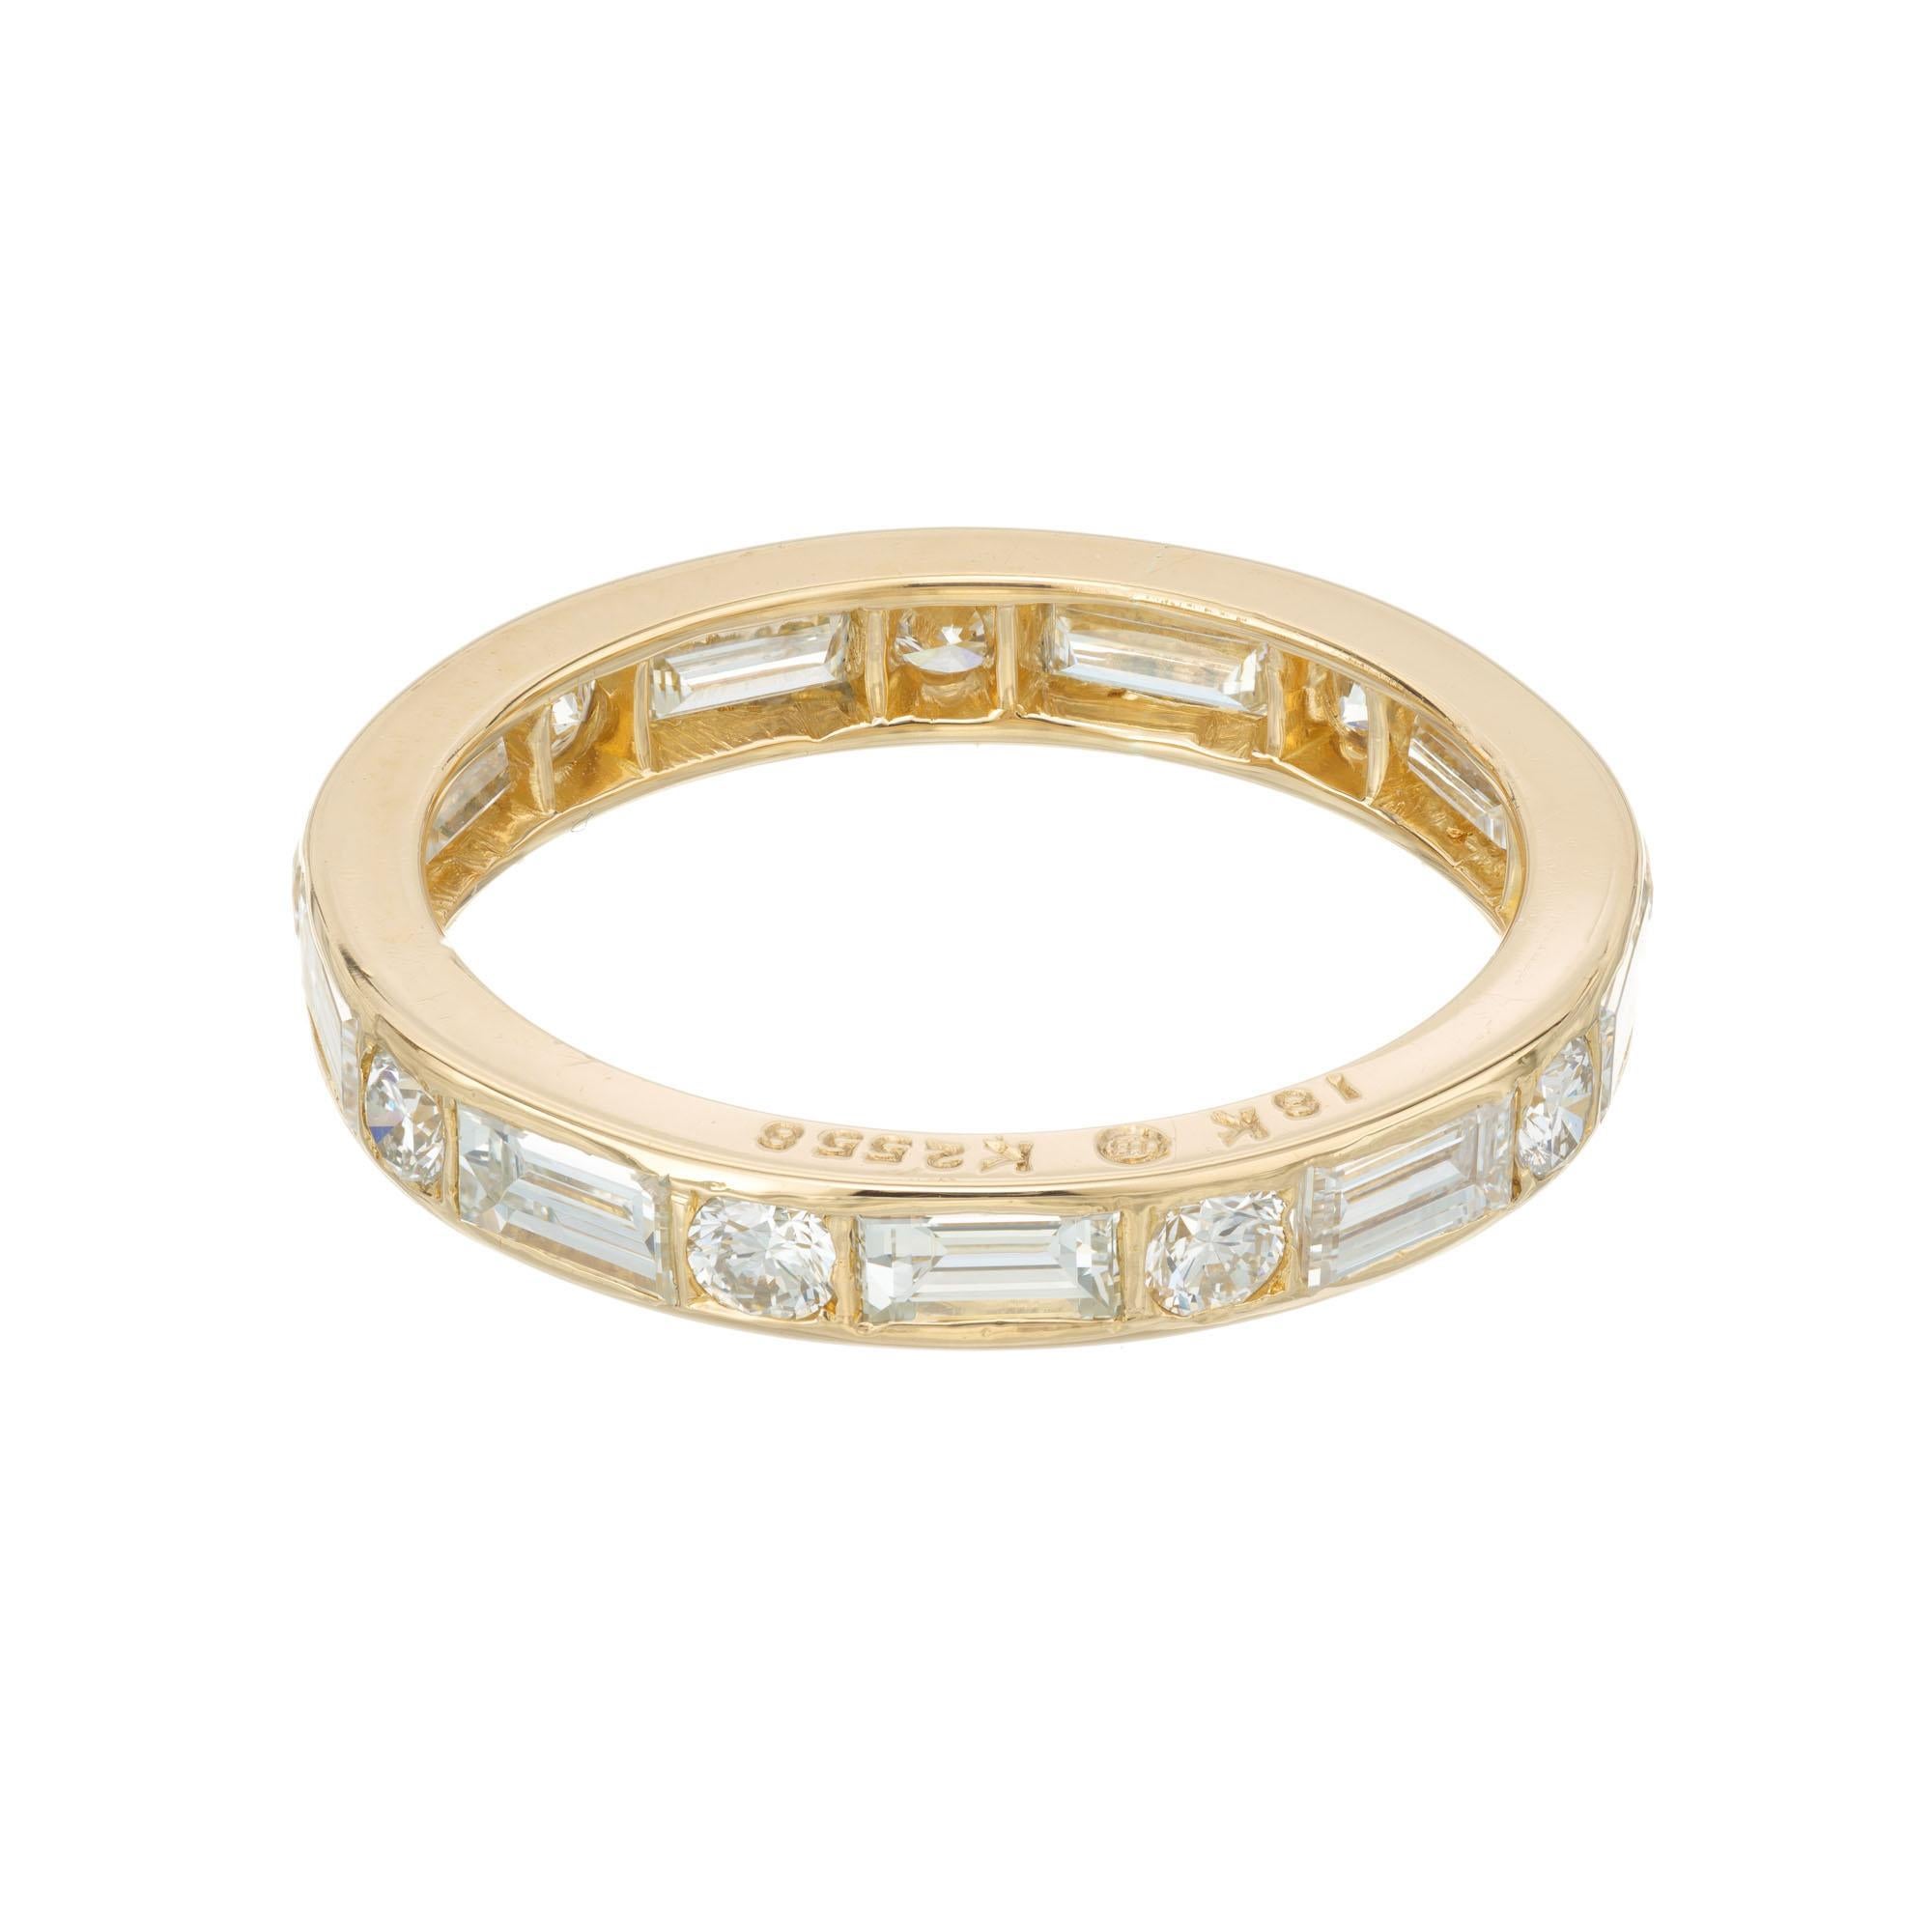 Oscar Hyman Brothers 18k yellow gold Eternity band ring. 9 round and baguette diamonds set in a 18k yellow gold setting.     

9 round diamonds, approx. total weight .30cts
9 baguette diamonds, approx. total weight .95cts
Size 4 3/4 and not